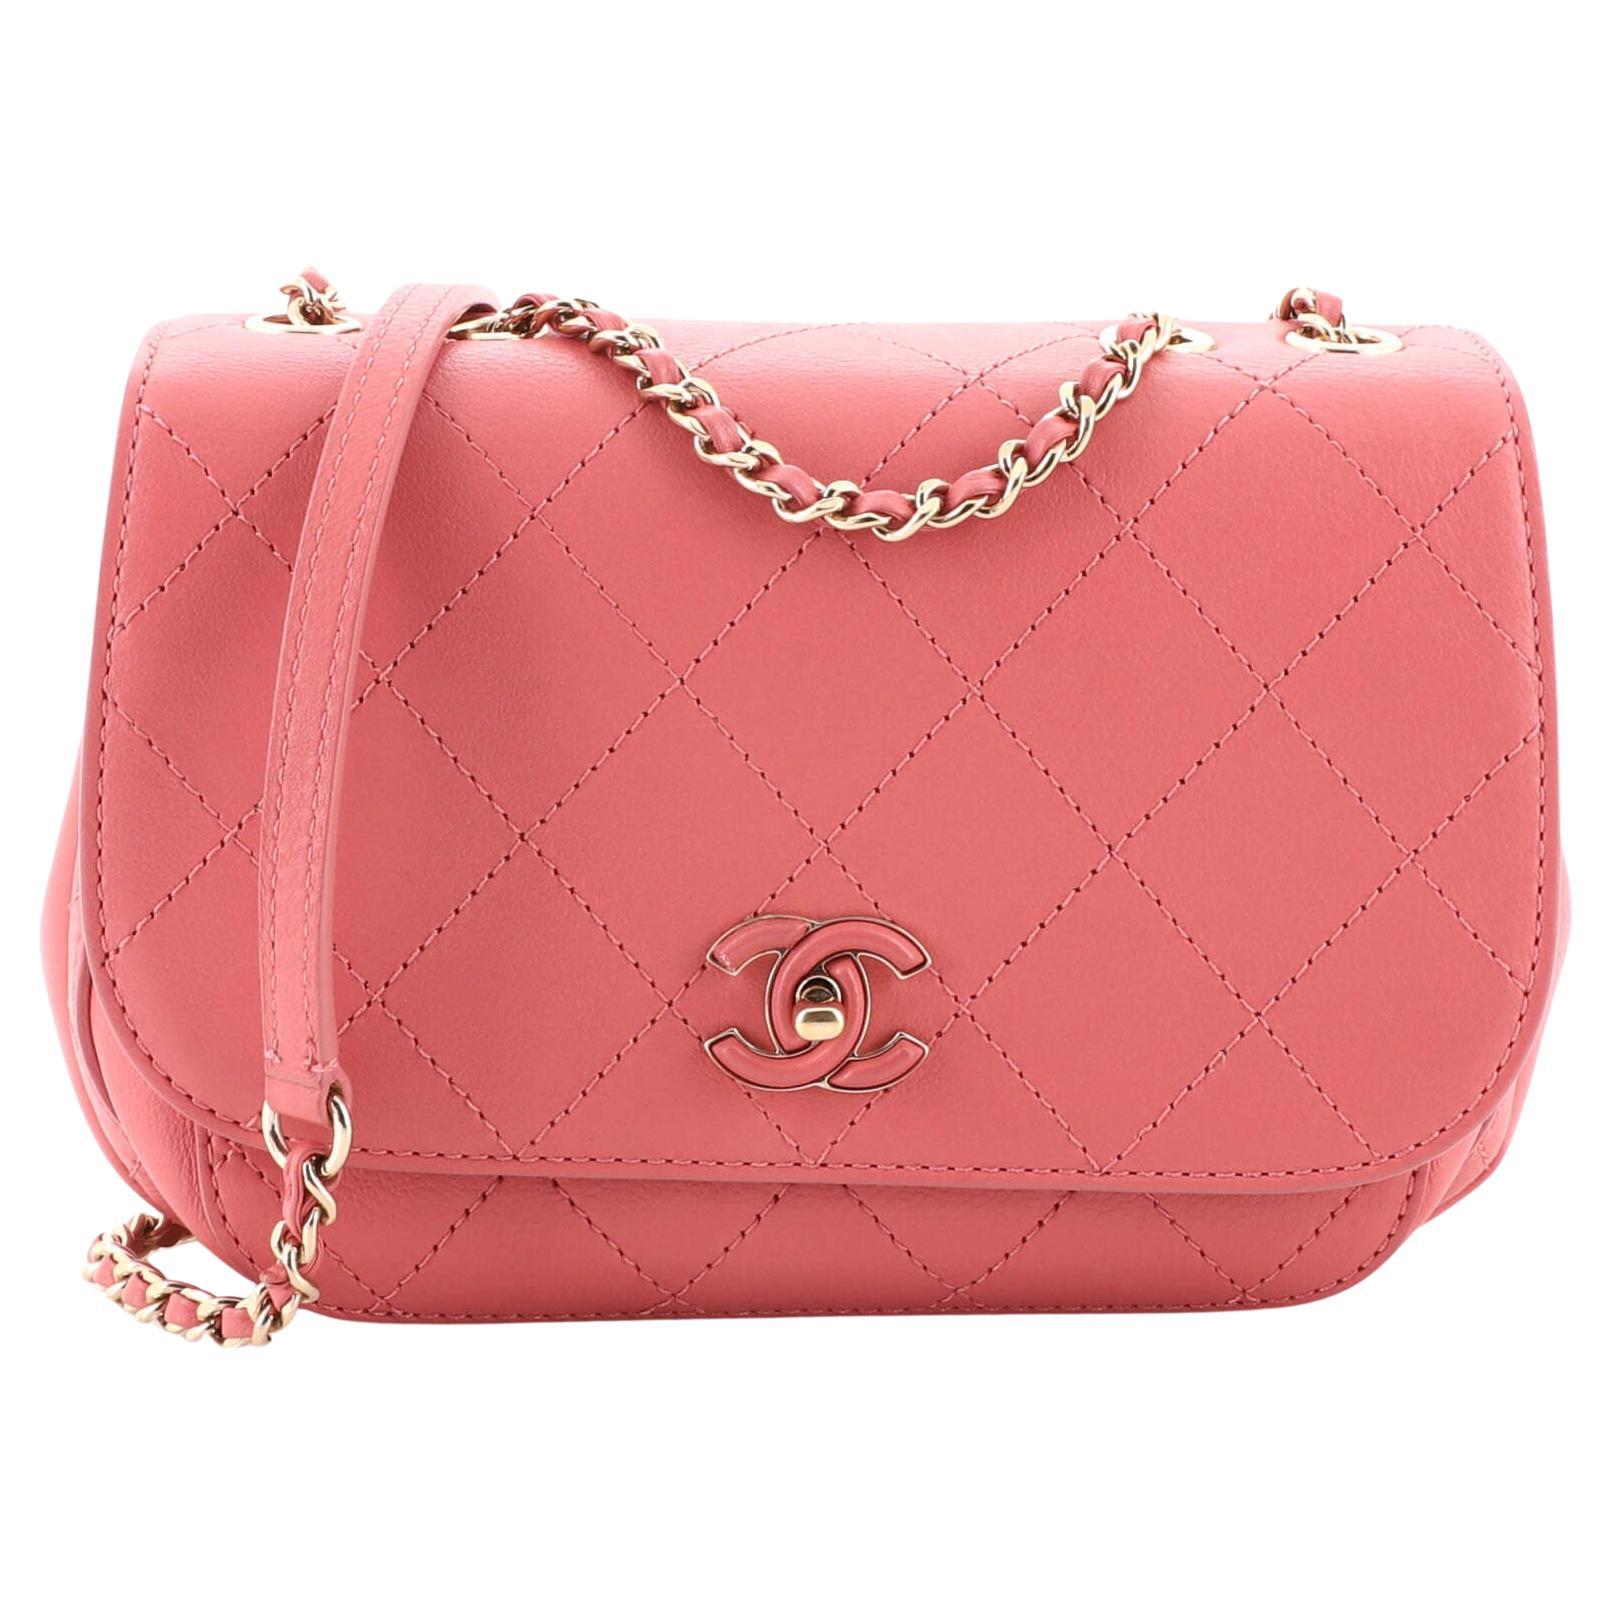 CHANEL Saddle Bag Quilted Leather with Chain Detail Medium